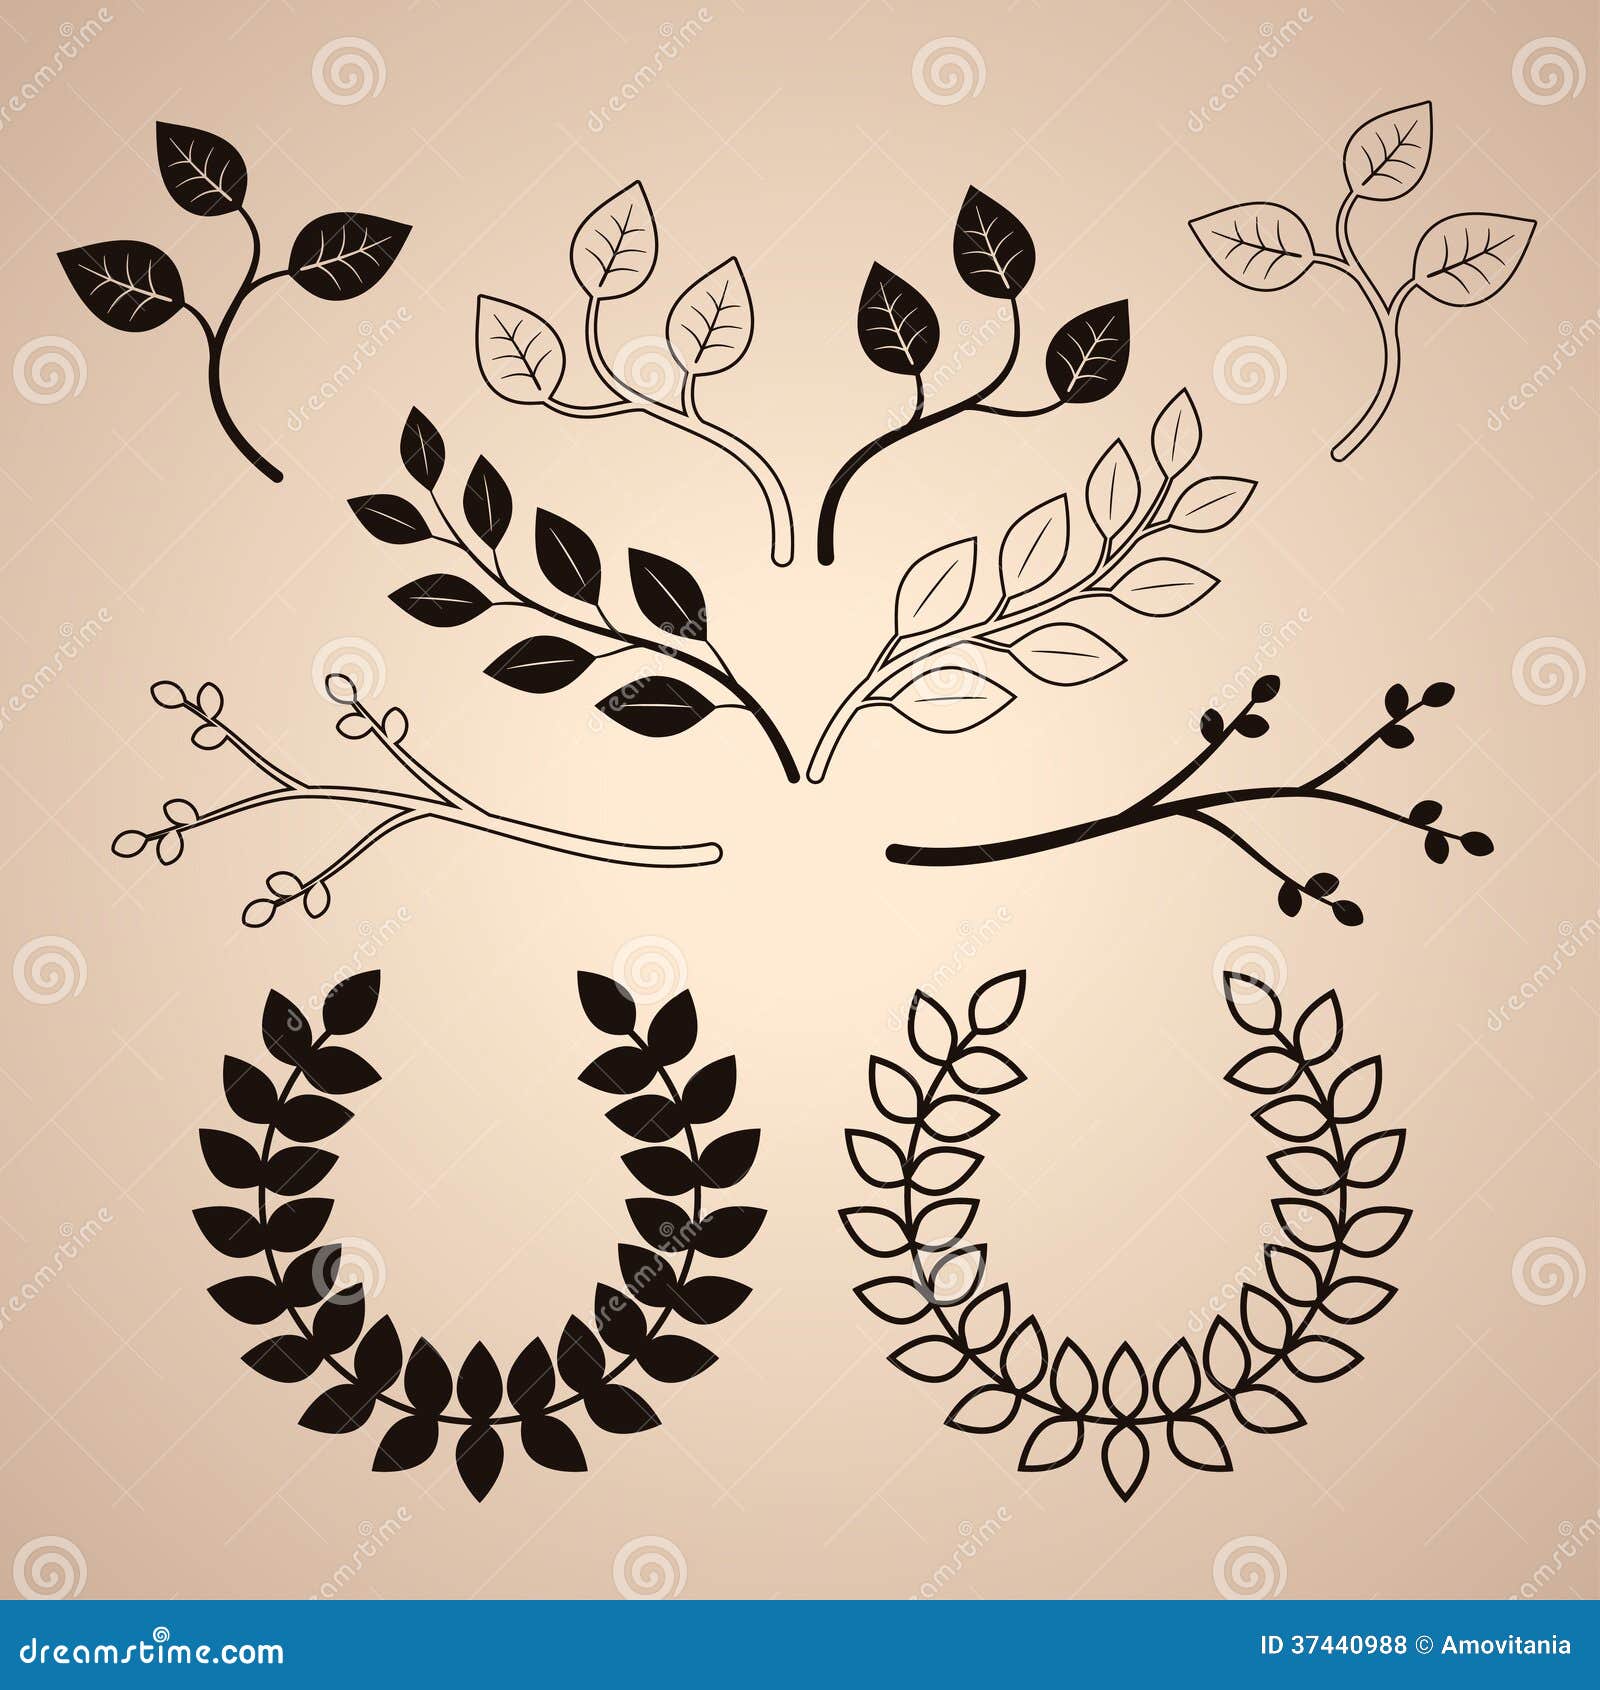 Set of Decorative Vintage Branches and Wreathes Stock Vector